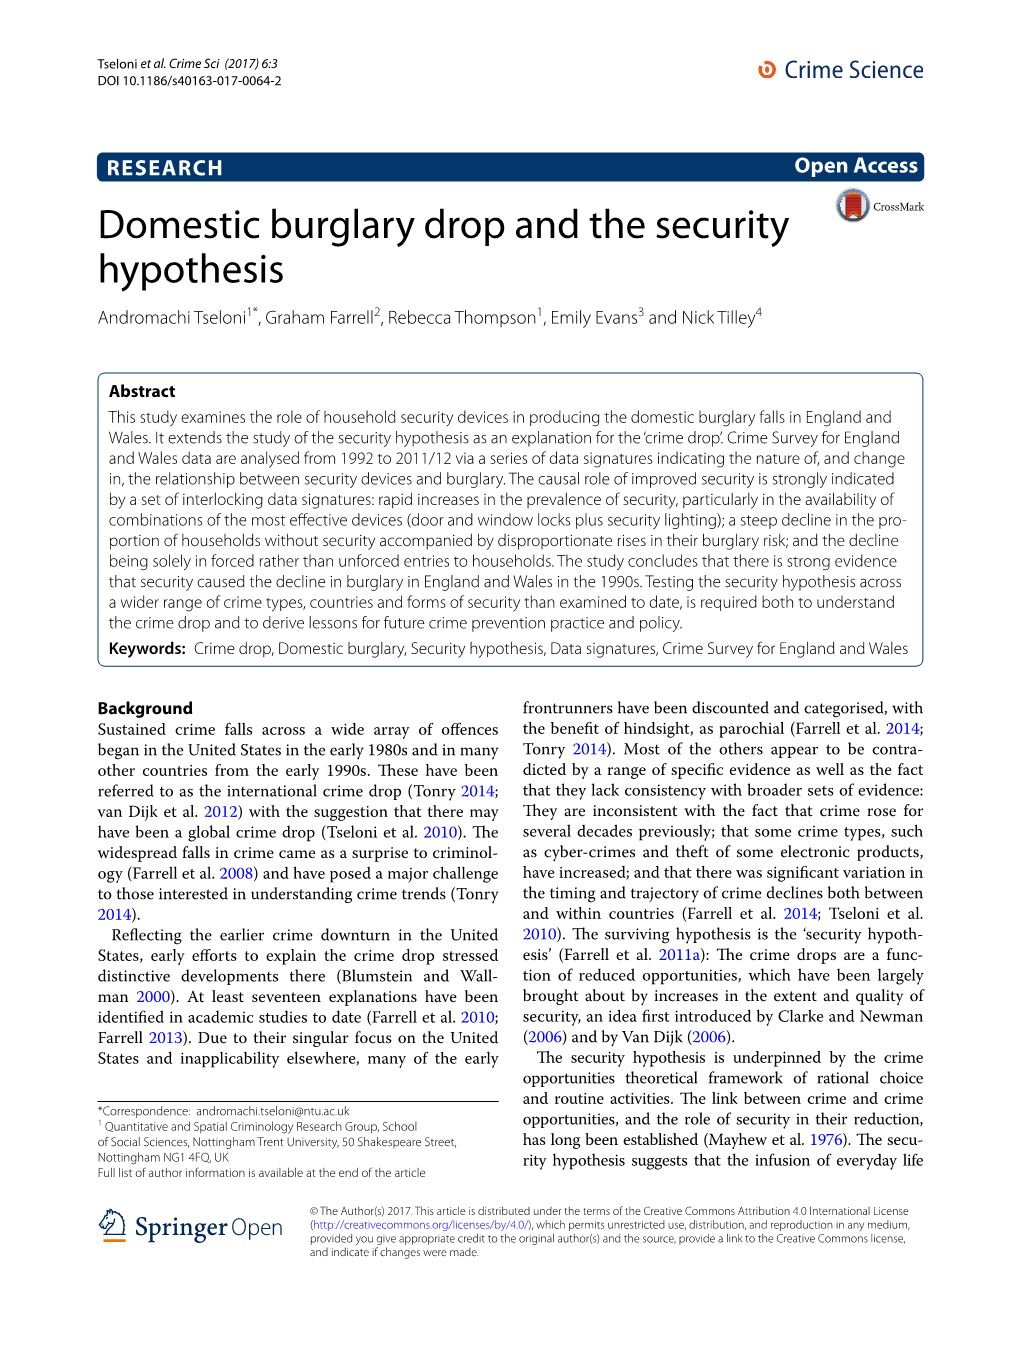 Domestic Burglary Drop and the Security Hypothesis Andromachi Tseloni1*, Graham Farrell2, Rebecca Thompson1, Emily Evans3 and Nick Tilley4